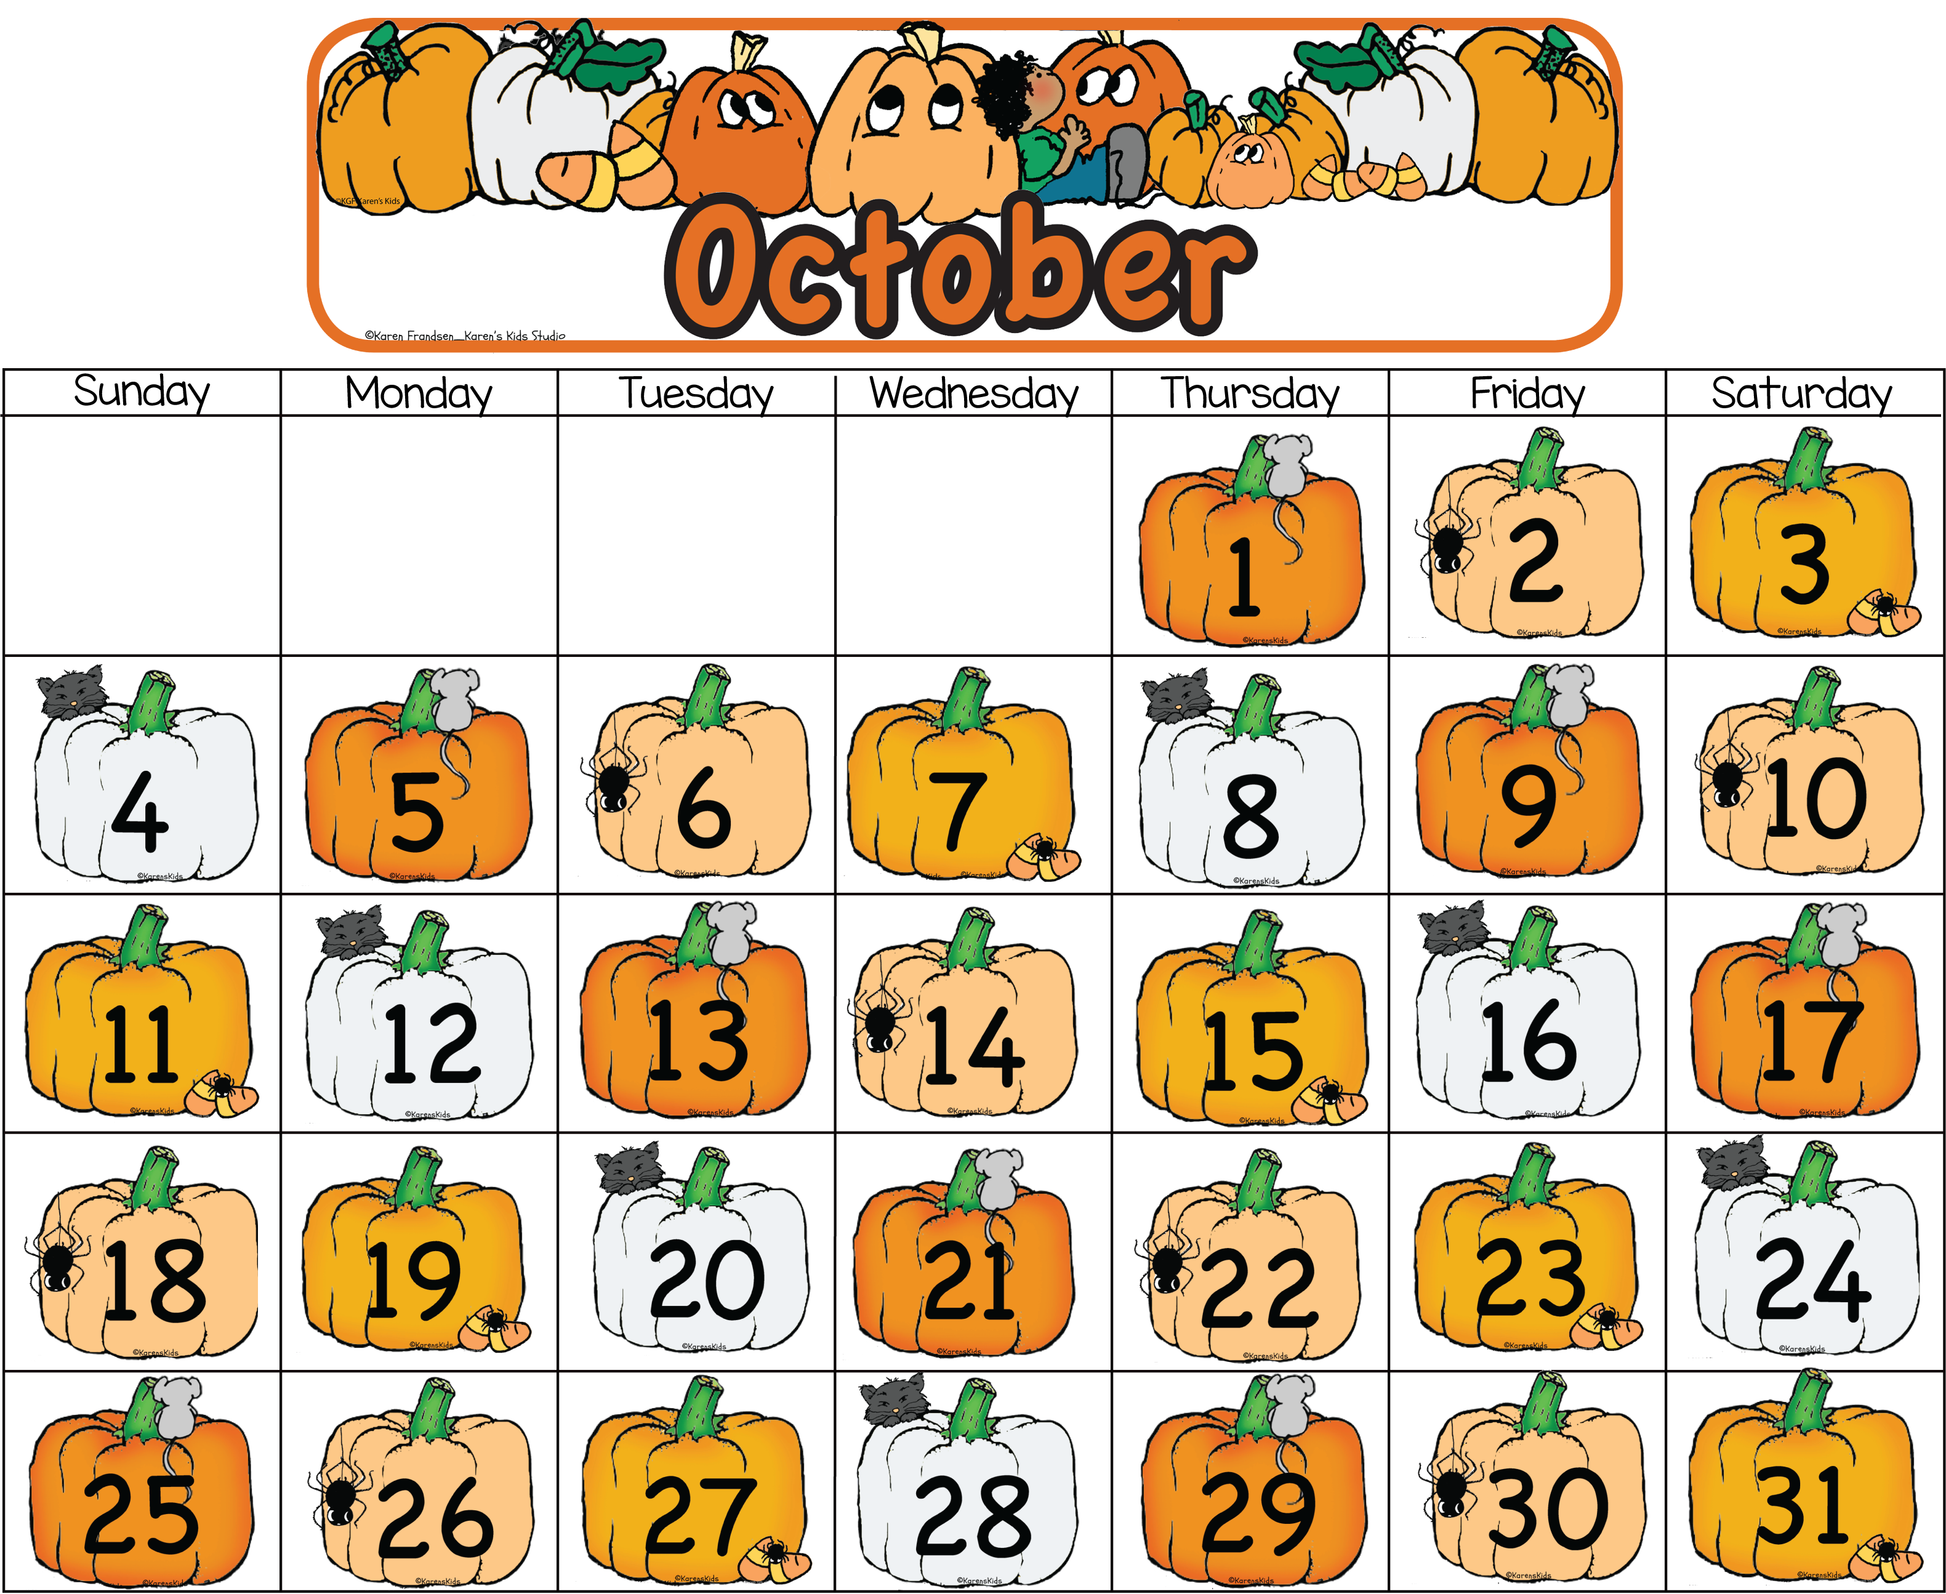 The image shows an October calendar with a header decorated with cute pumpkins and October in large letters. Days of the week are listed in a row and pumpkins, each with a number fit inside the daily boxes beginning with Thursday.  Pumpkins are different shades of oranges and white.